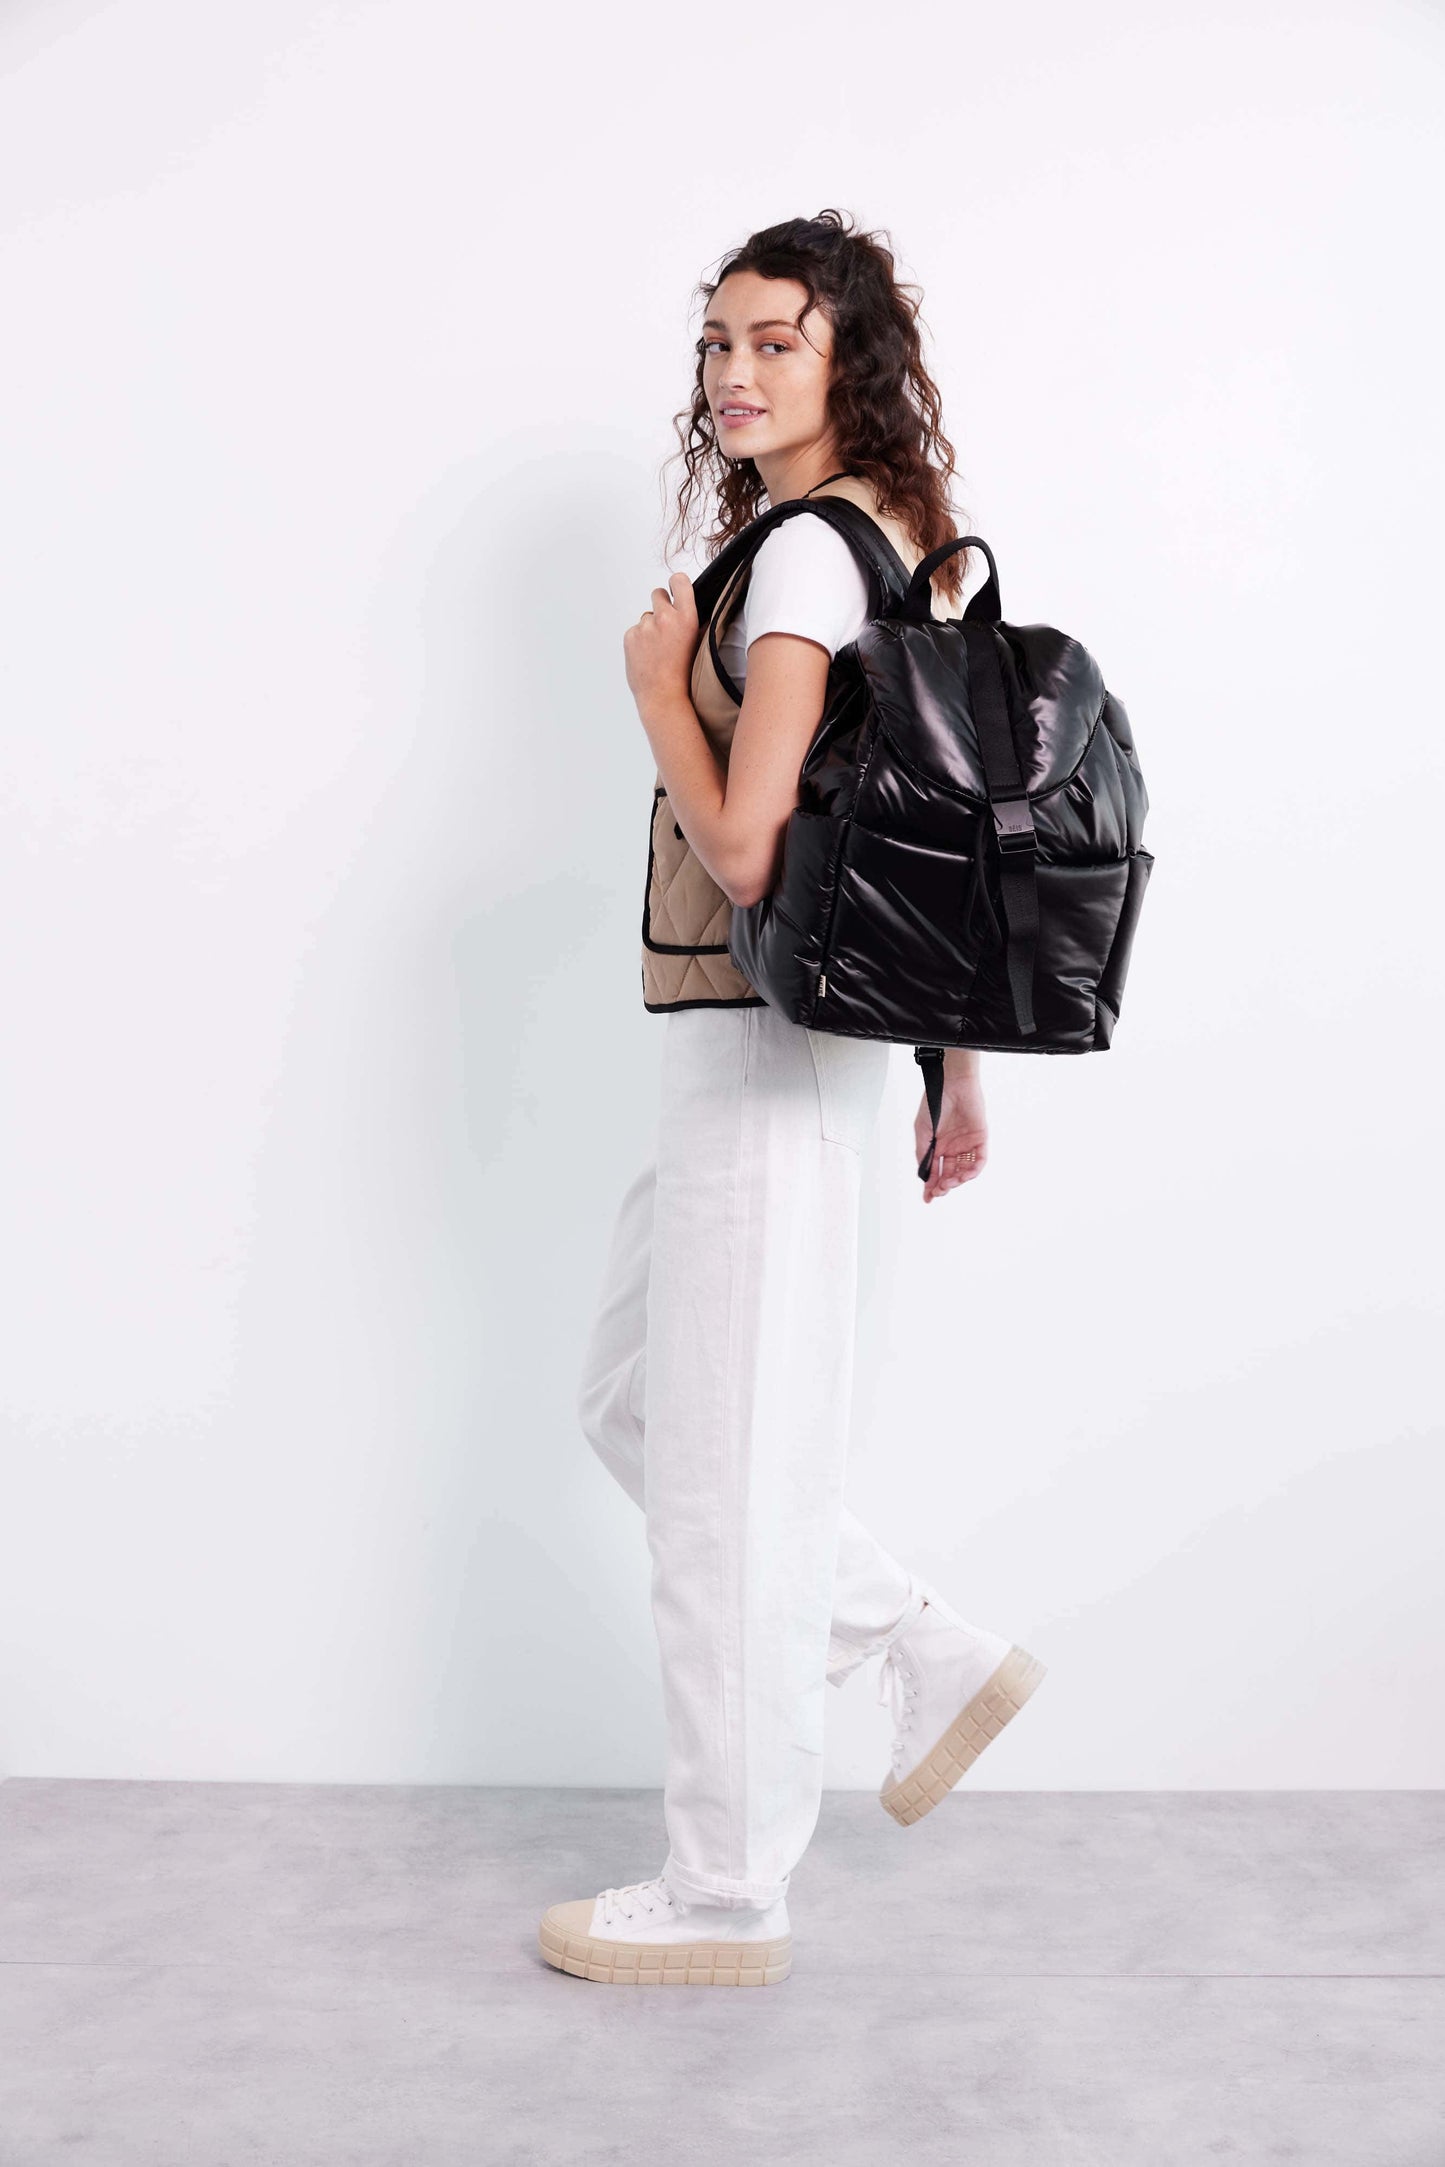 The Cargo Backpack in Black